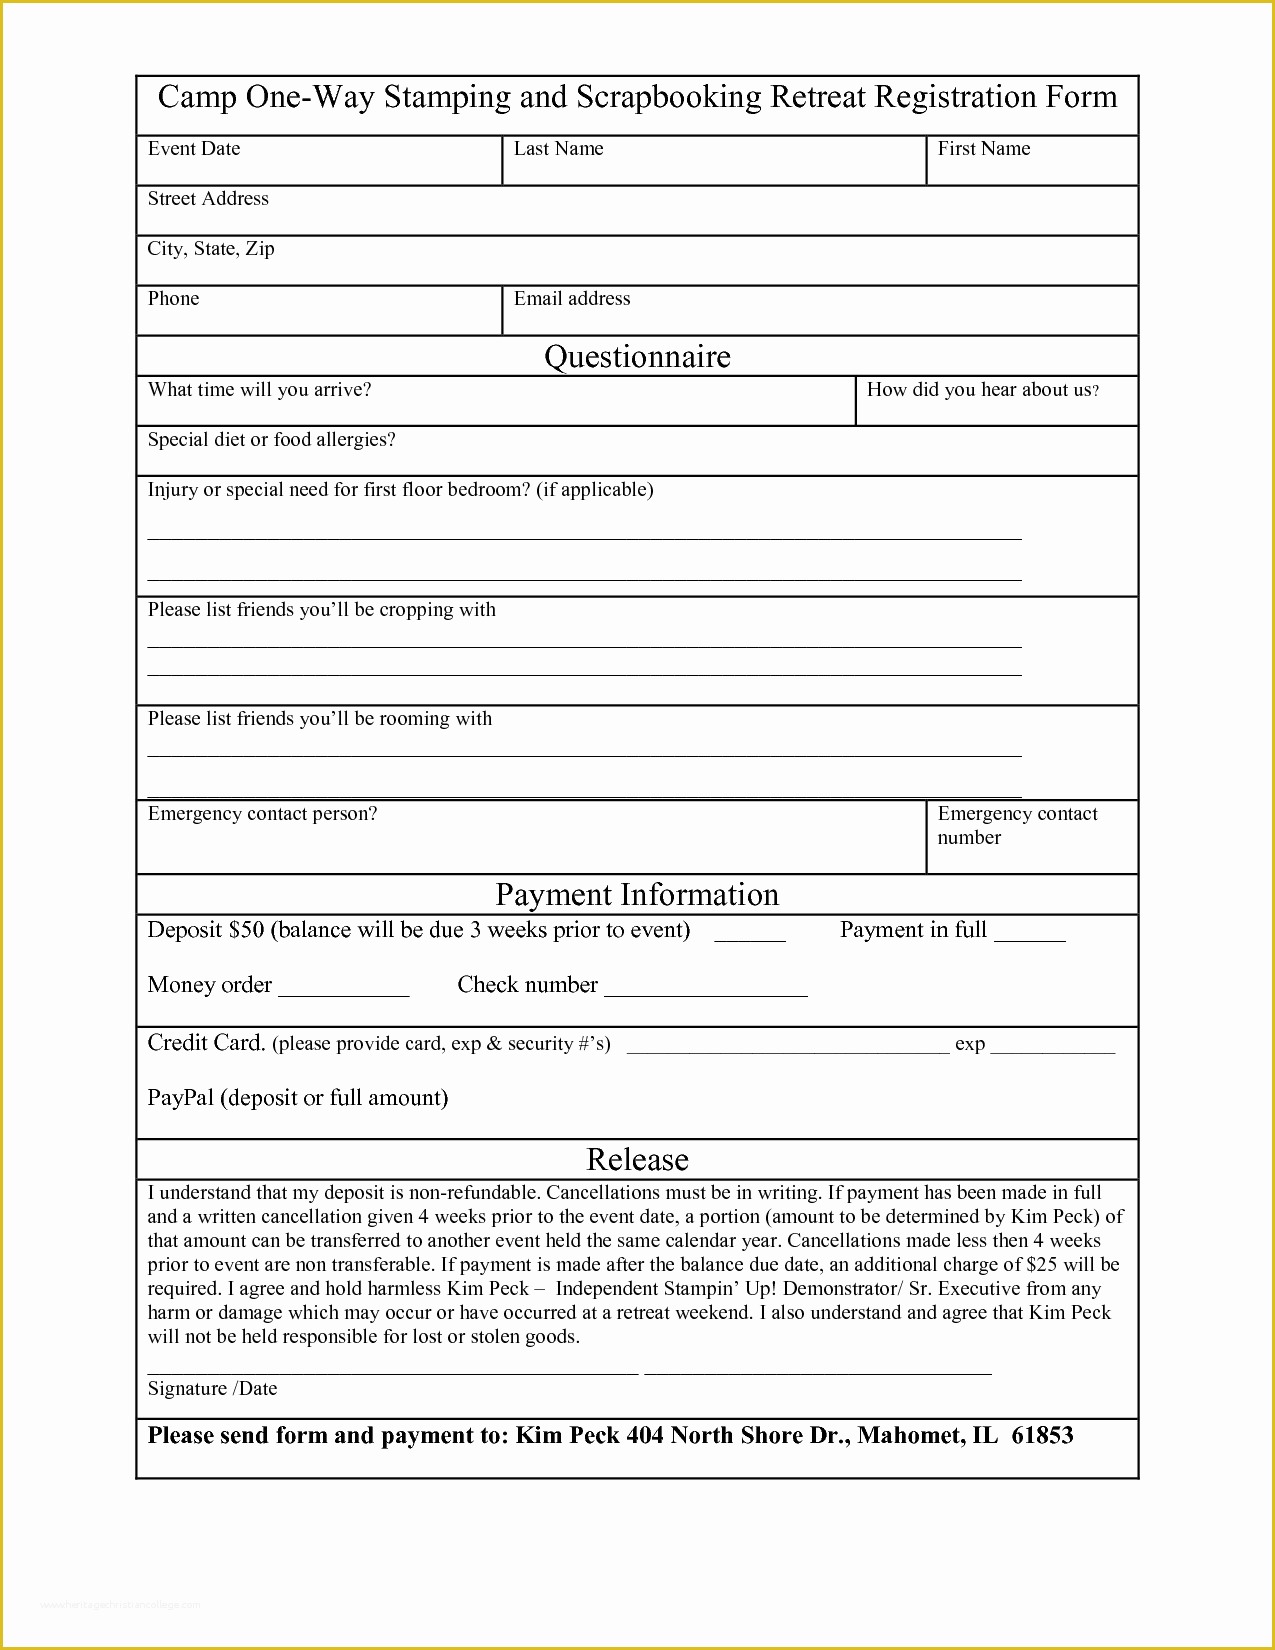 Free Patient Registration form Template Of Free Registration form Template Word Want A Free Refresher